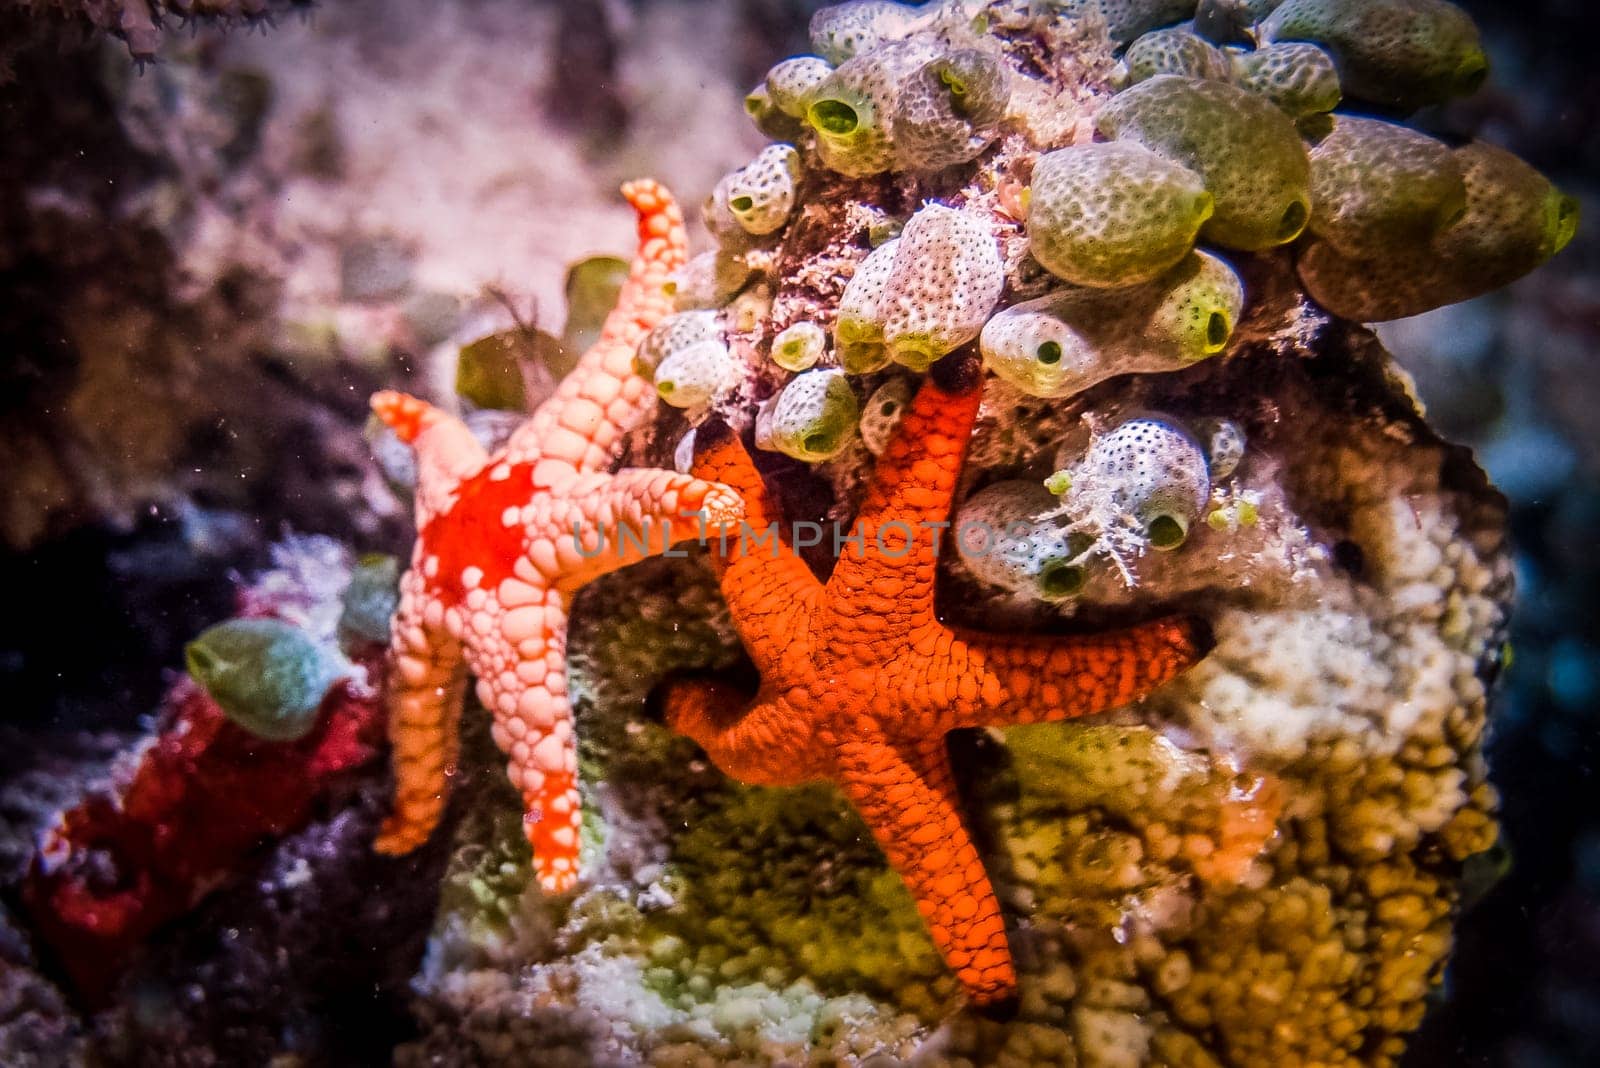 A close-up of starfish at the bottom of the sea